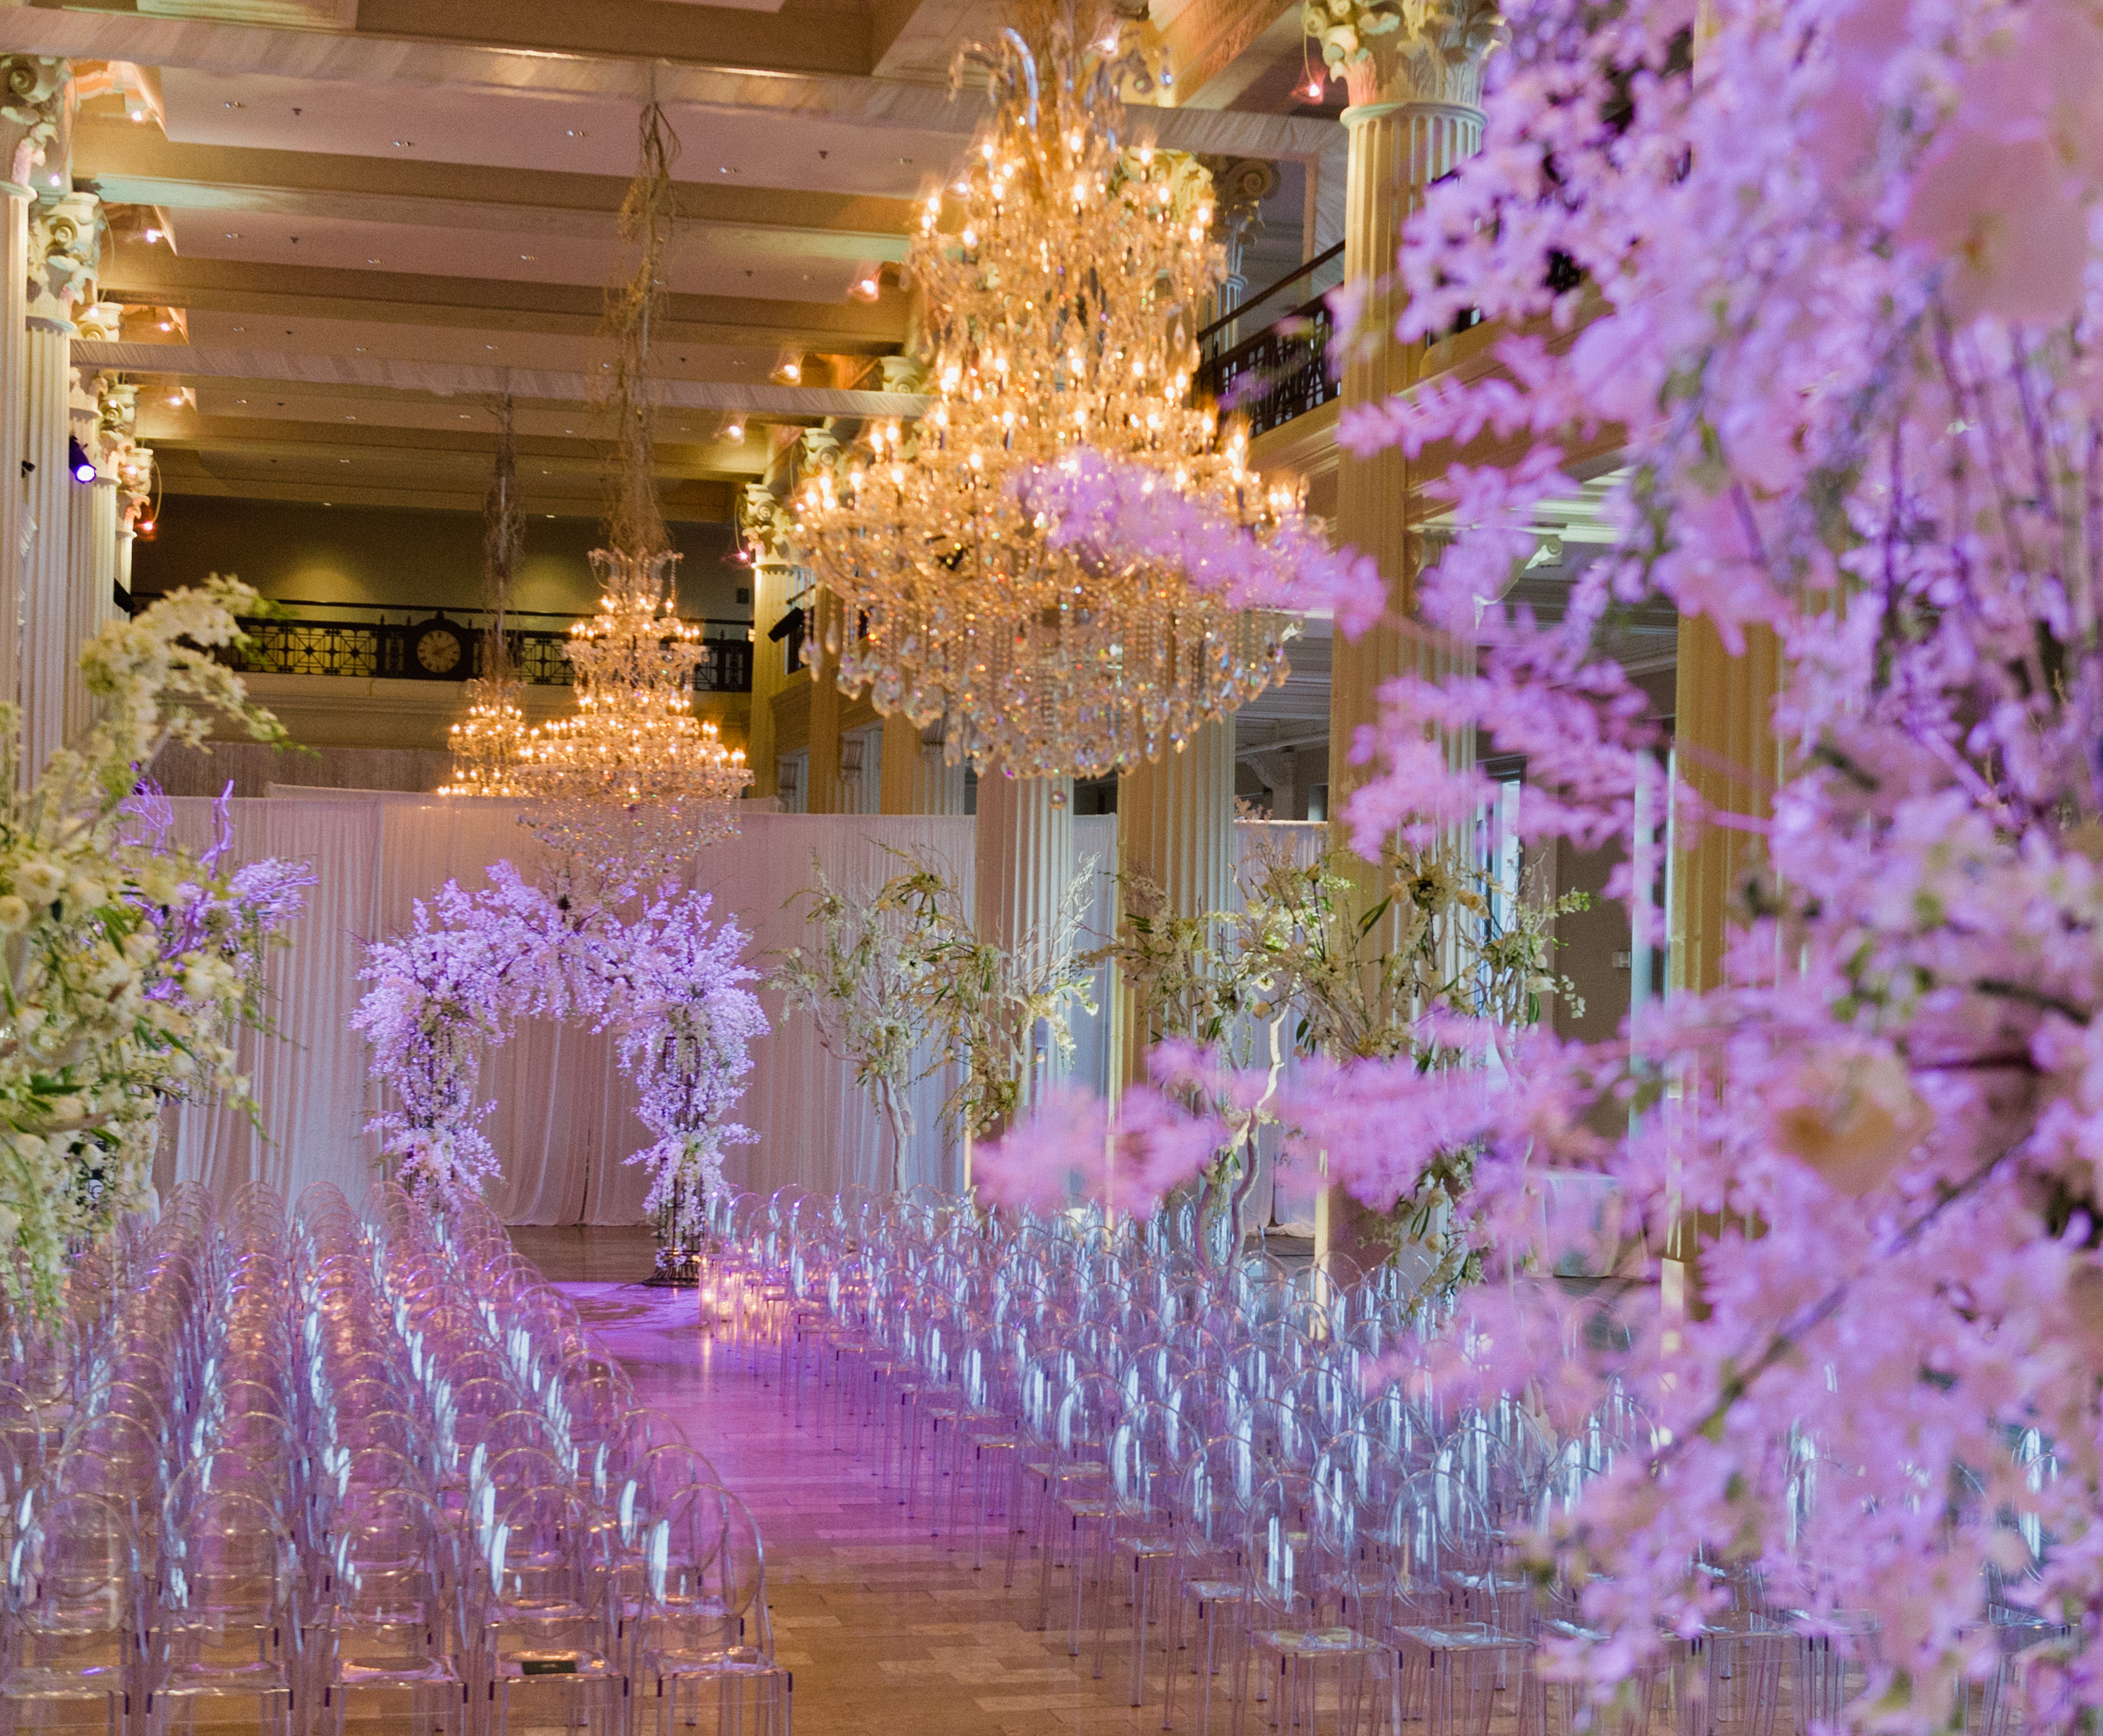 A ceremony space is decorated with crystal chandeliers and white flower installations for a winter wedding in Houston. The room is illuminated with a magenta light.